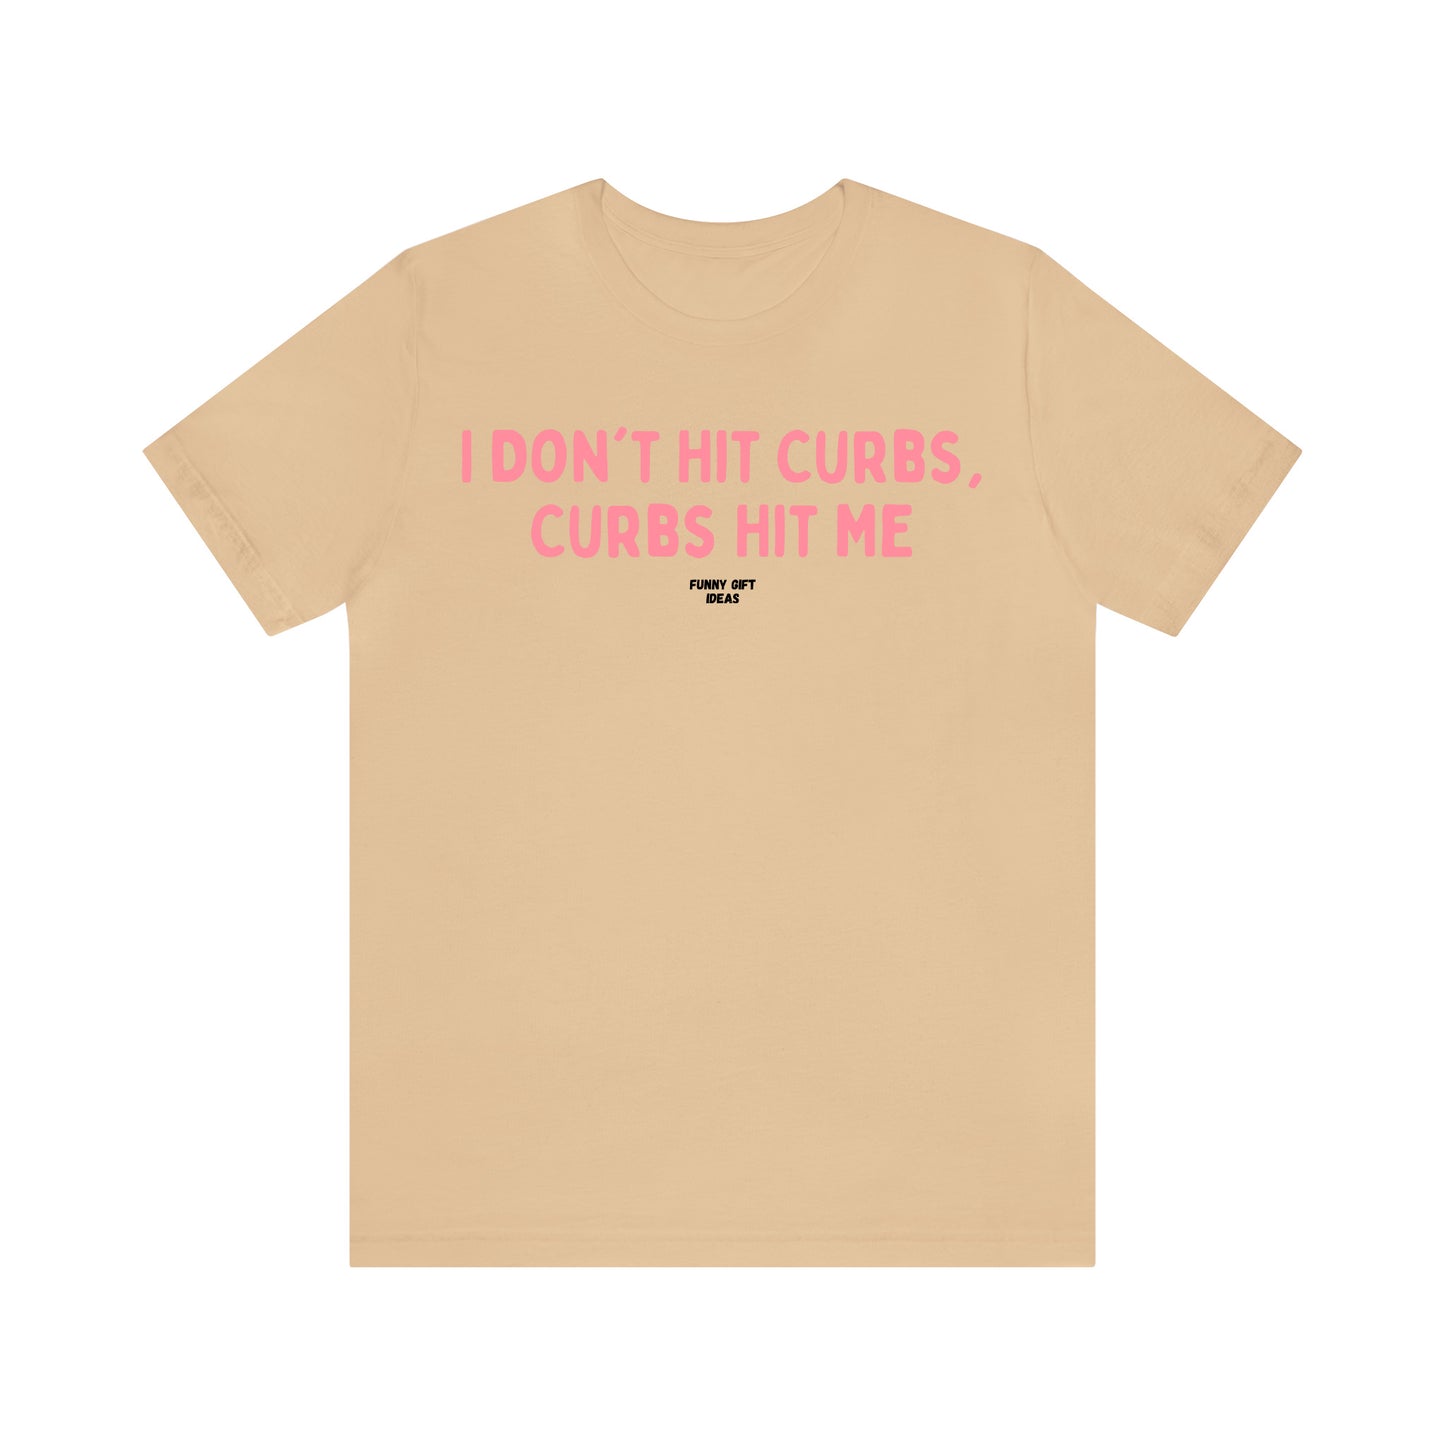 Funny Shirts for Women - I Don't Hit Curbs, Curbs Hit Me - Women's T Shirts